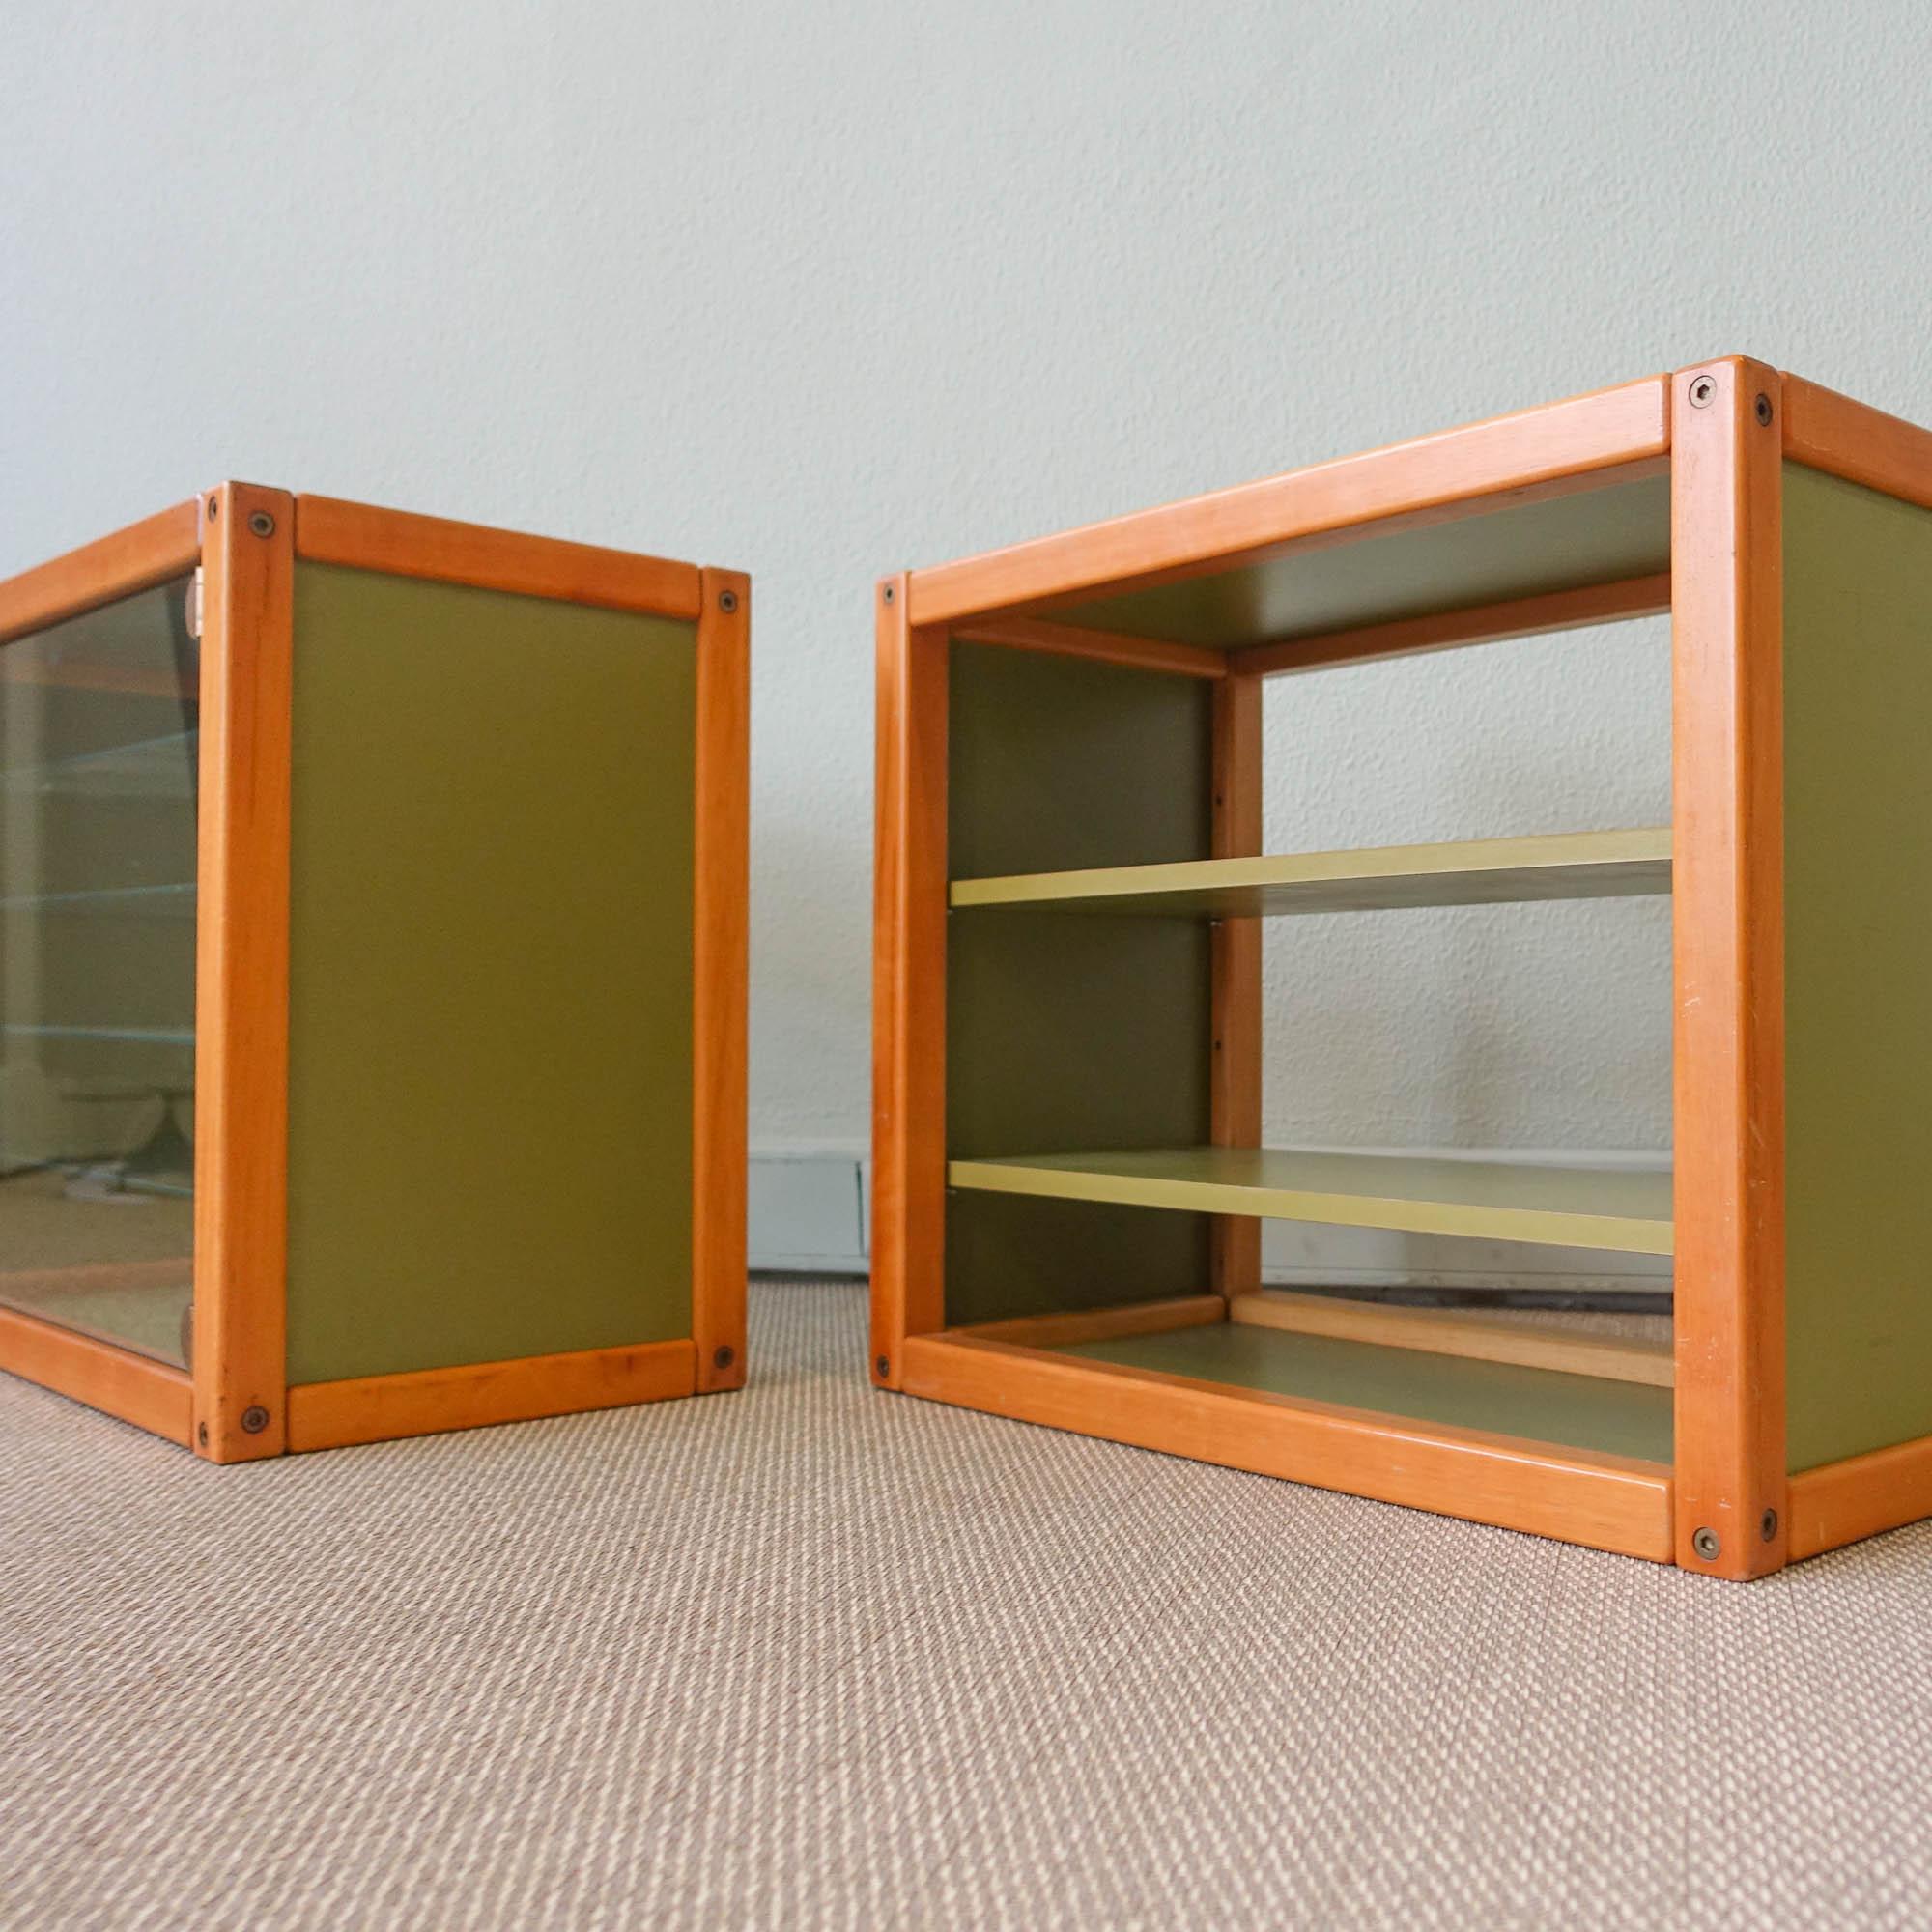 Pair of Vintage Profilsystem Collection Glass Storage Units by Elmar Flötotto For Sale 2